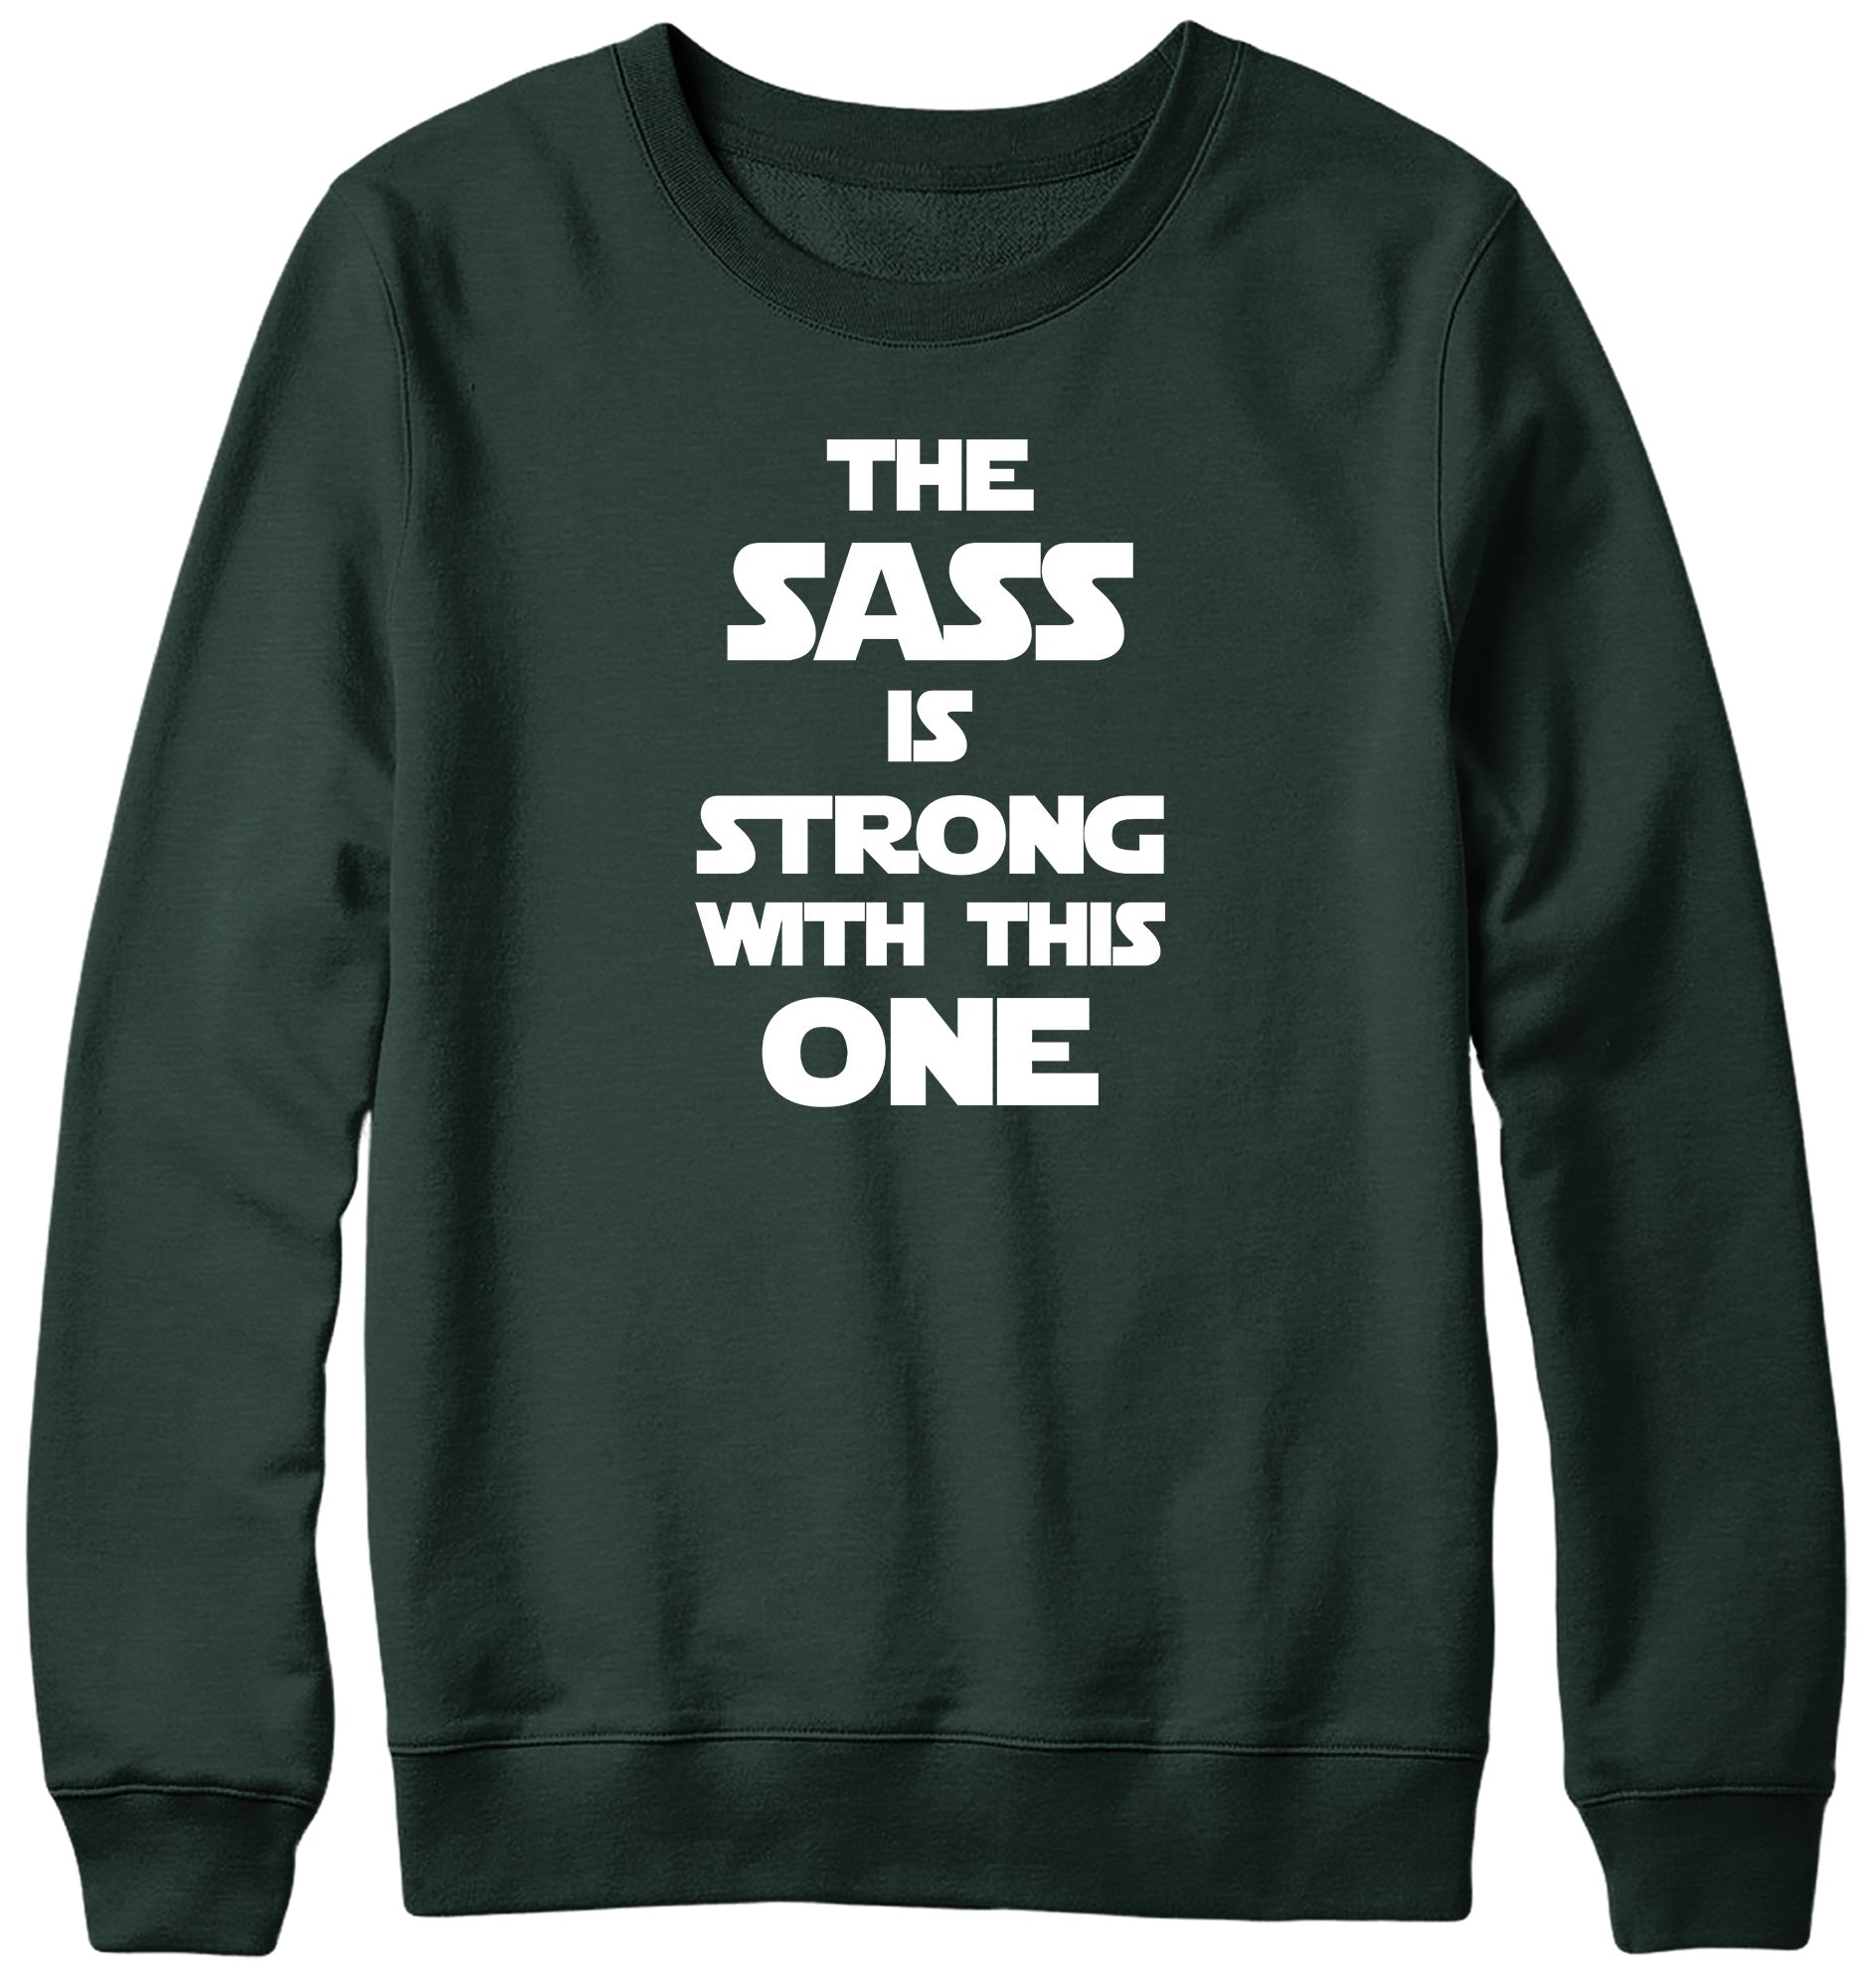 THE SASS IS STRONG WITH THIS ONE MENS LADIES WOMENS UNISEX SWEATSHIRT SWEATER